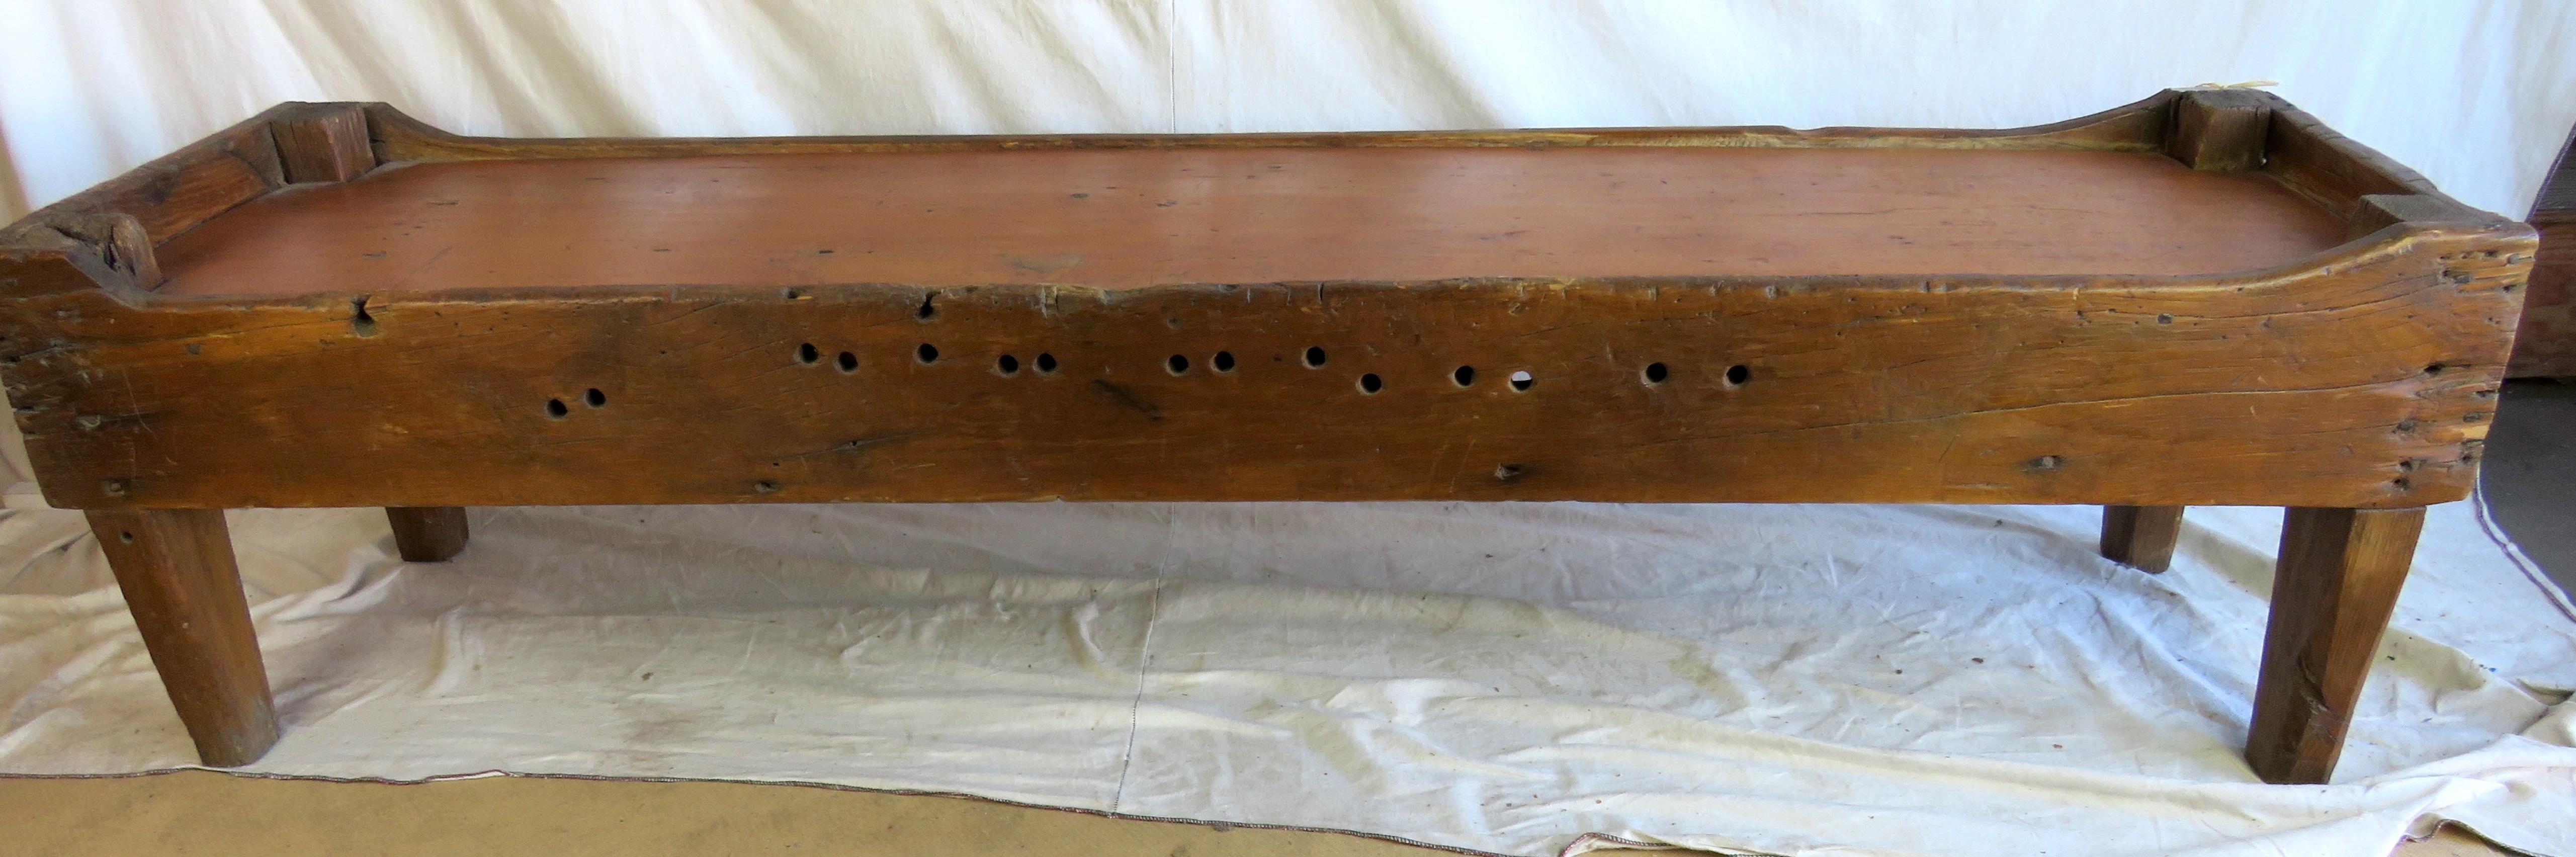 19th century flop bed/bench crafted from pine. Solid construction, good patina.